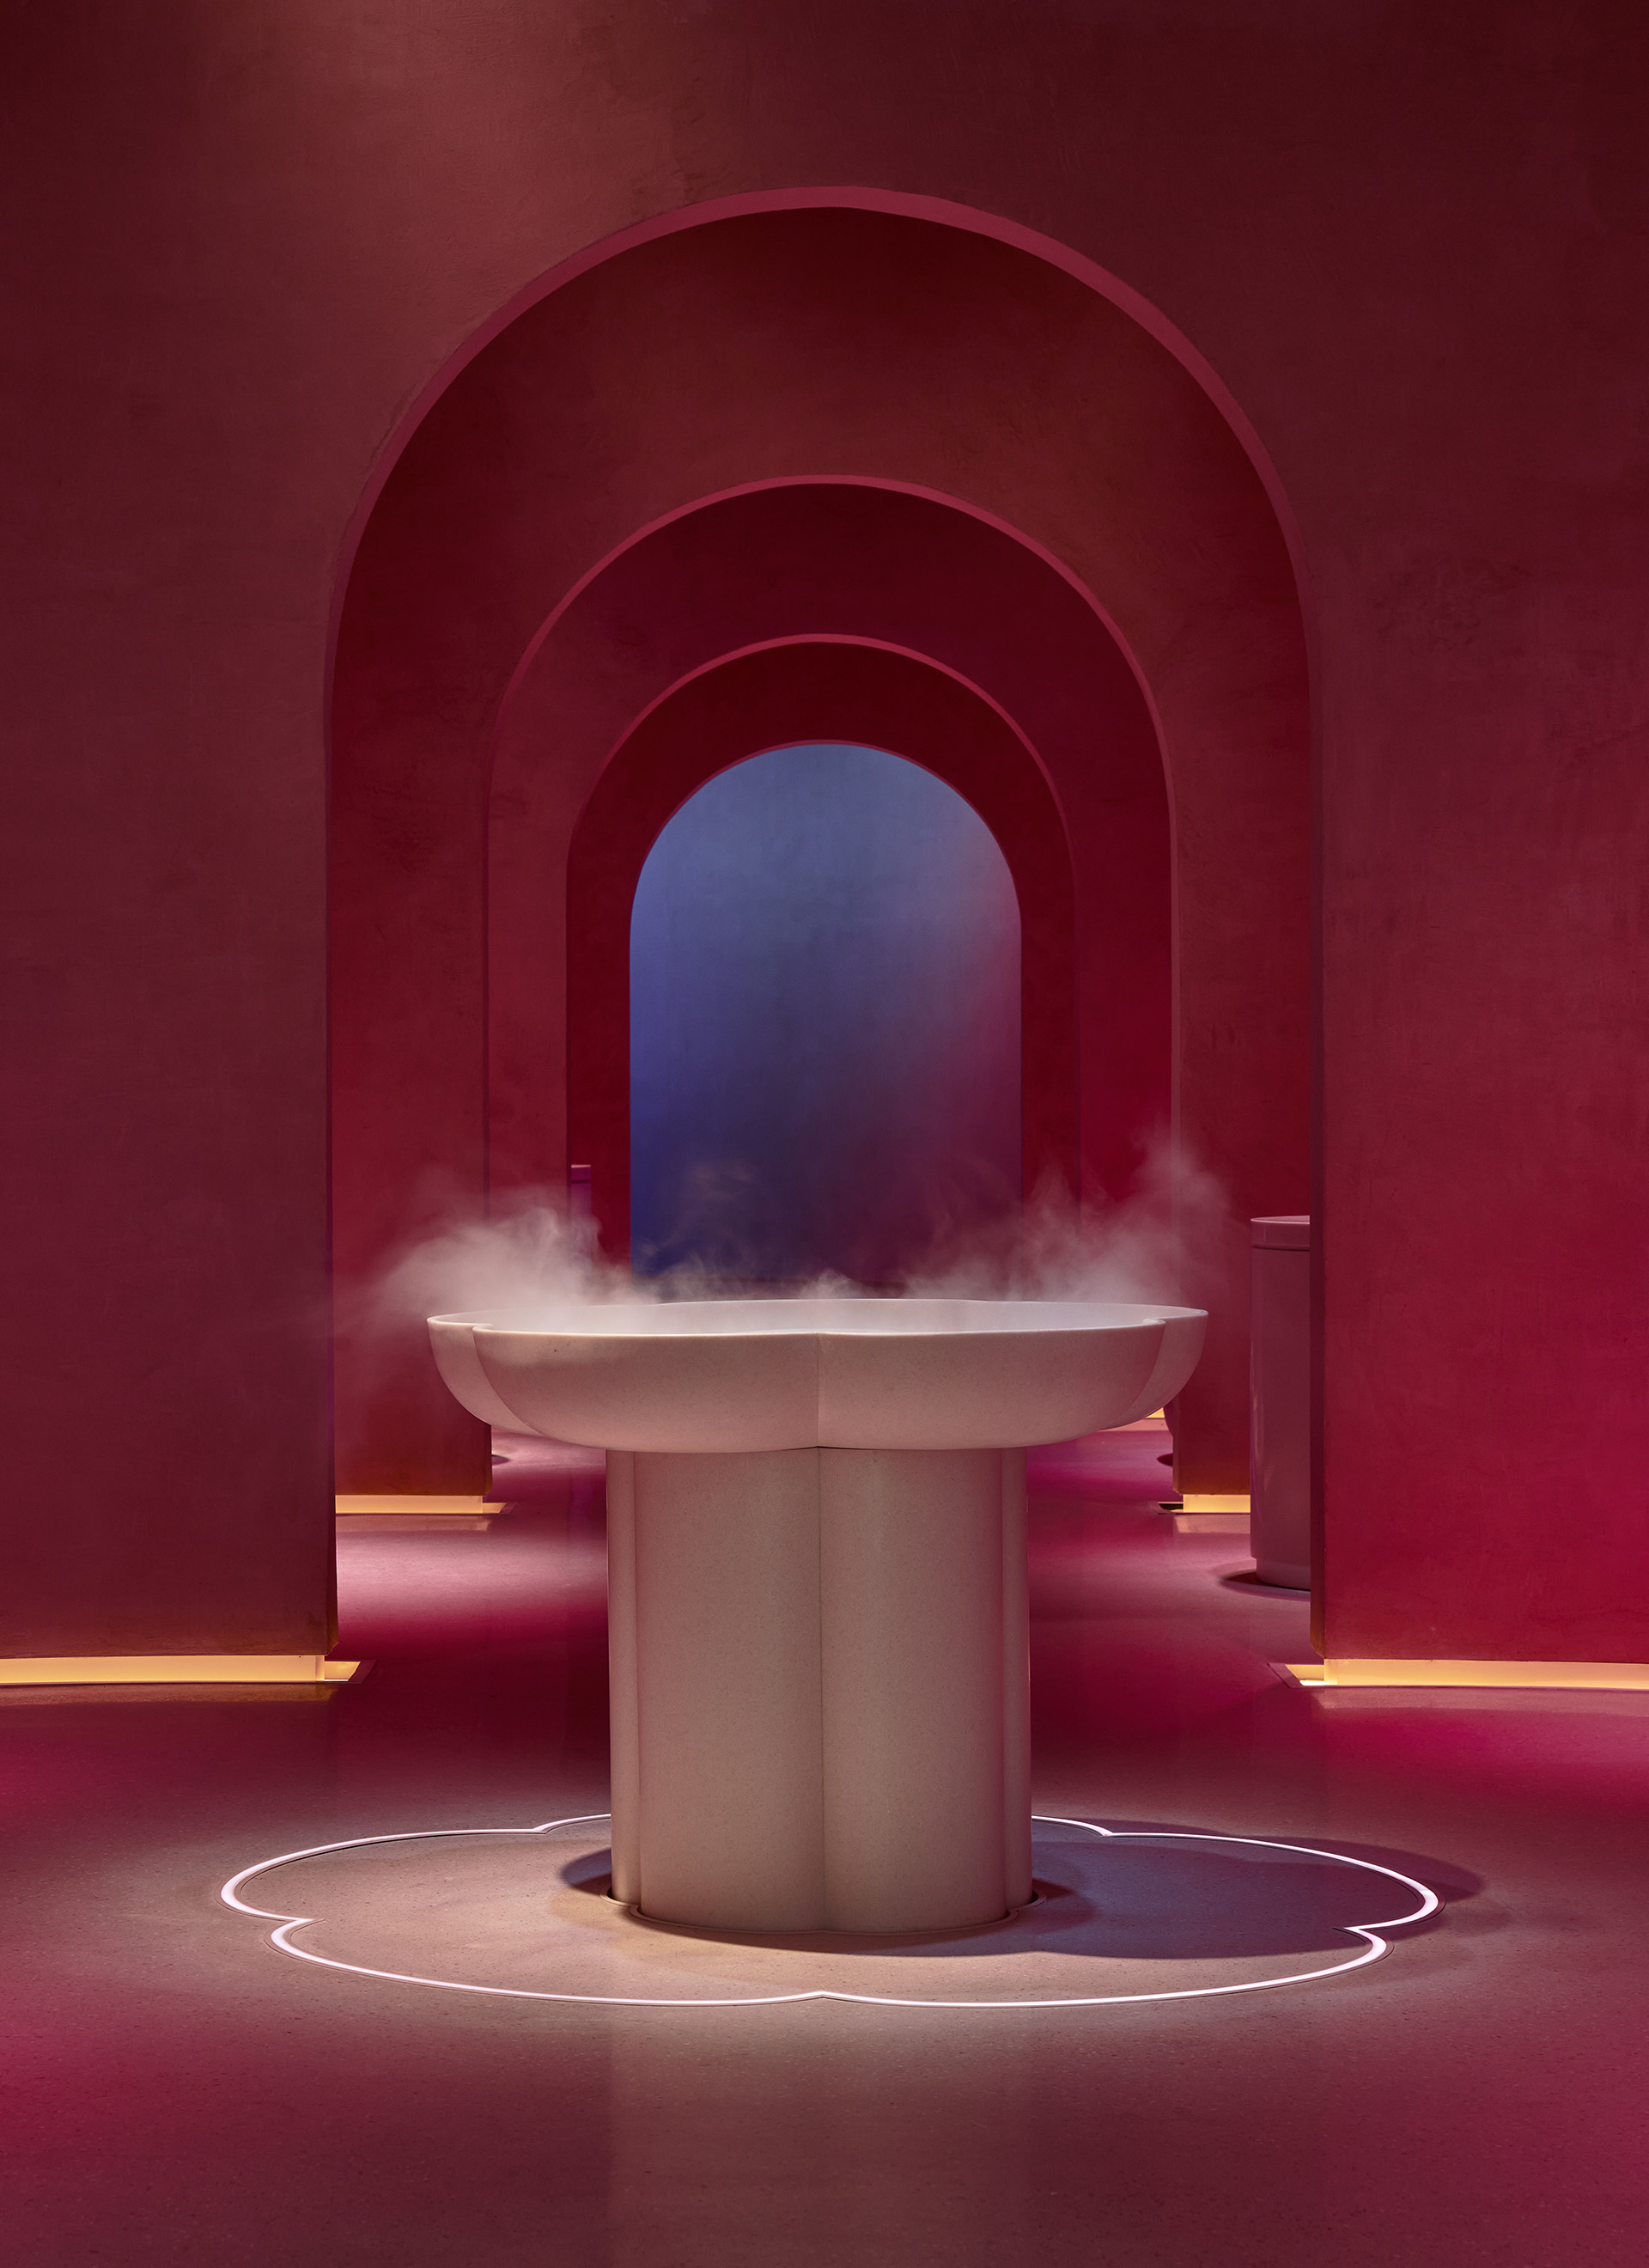 A view inside the spa with vapour pouring from a fountain.